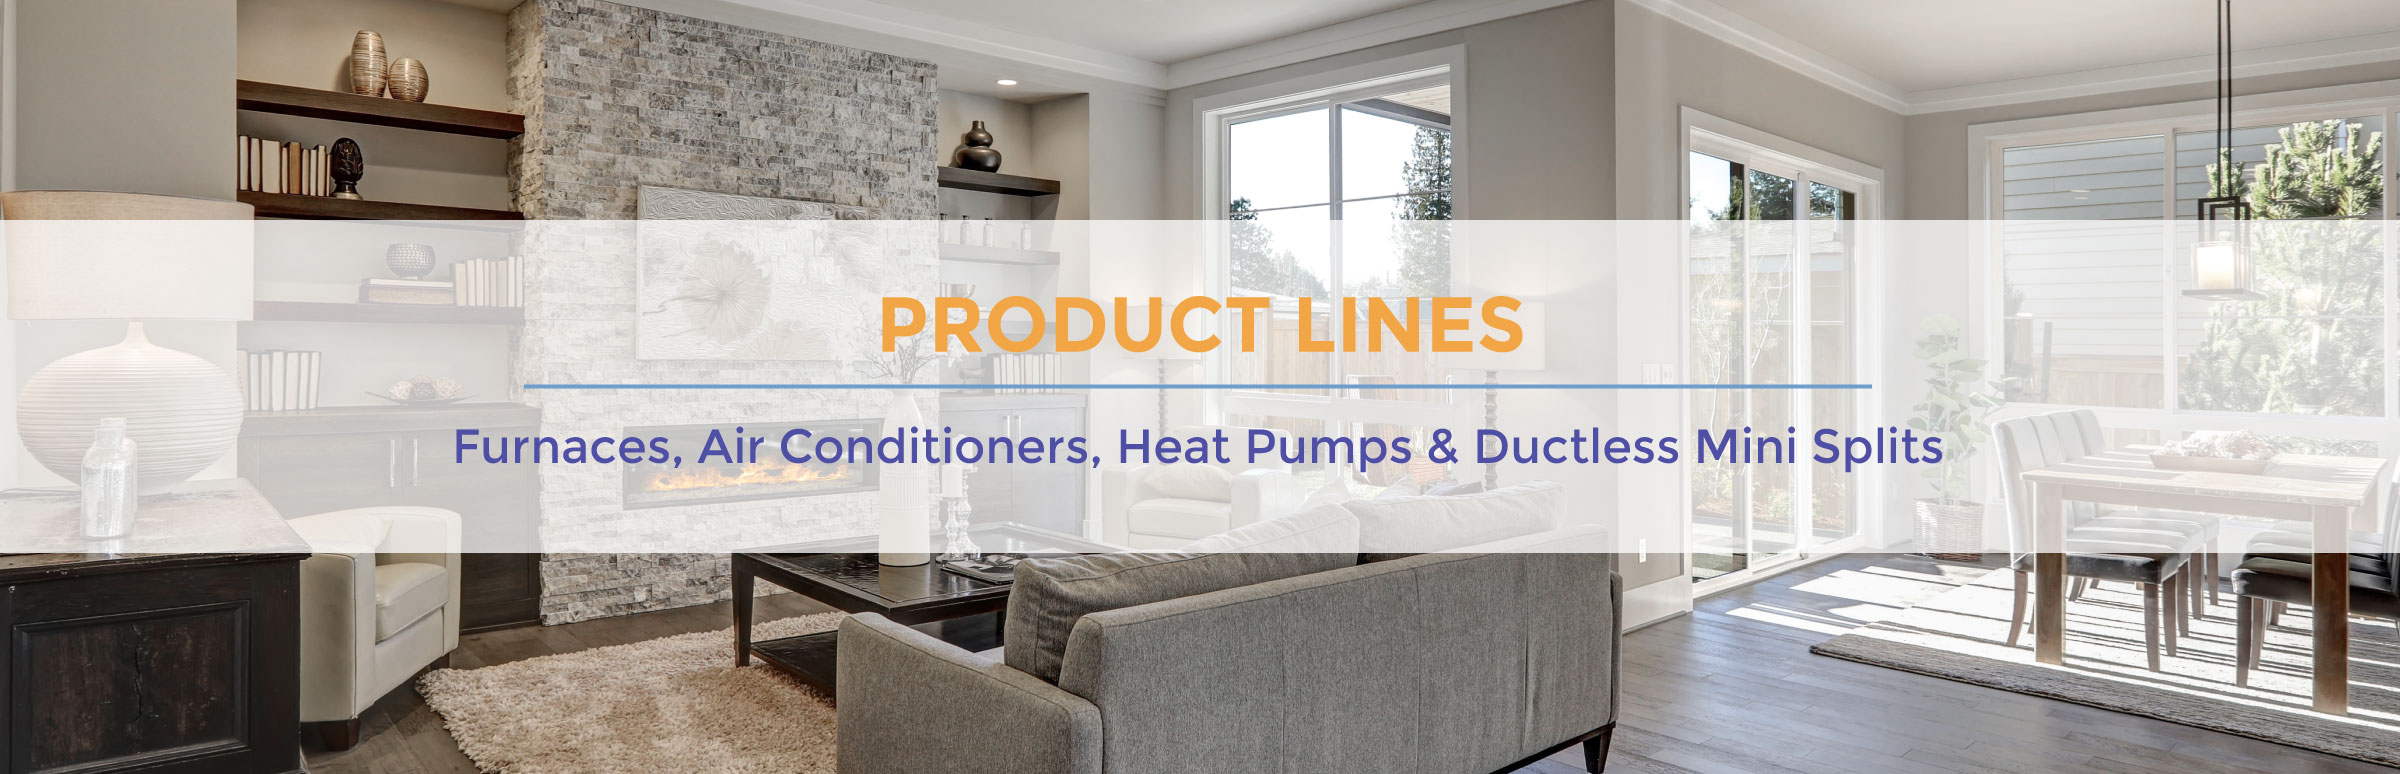 All Appliance Services is your local high-efficiency heating & A/C system experts! Call us today to get your new comfort system!